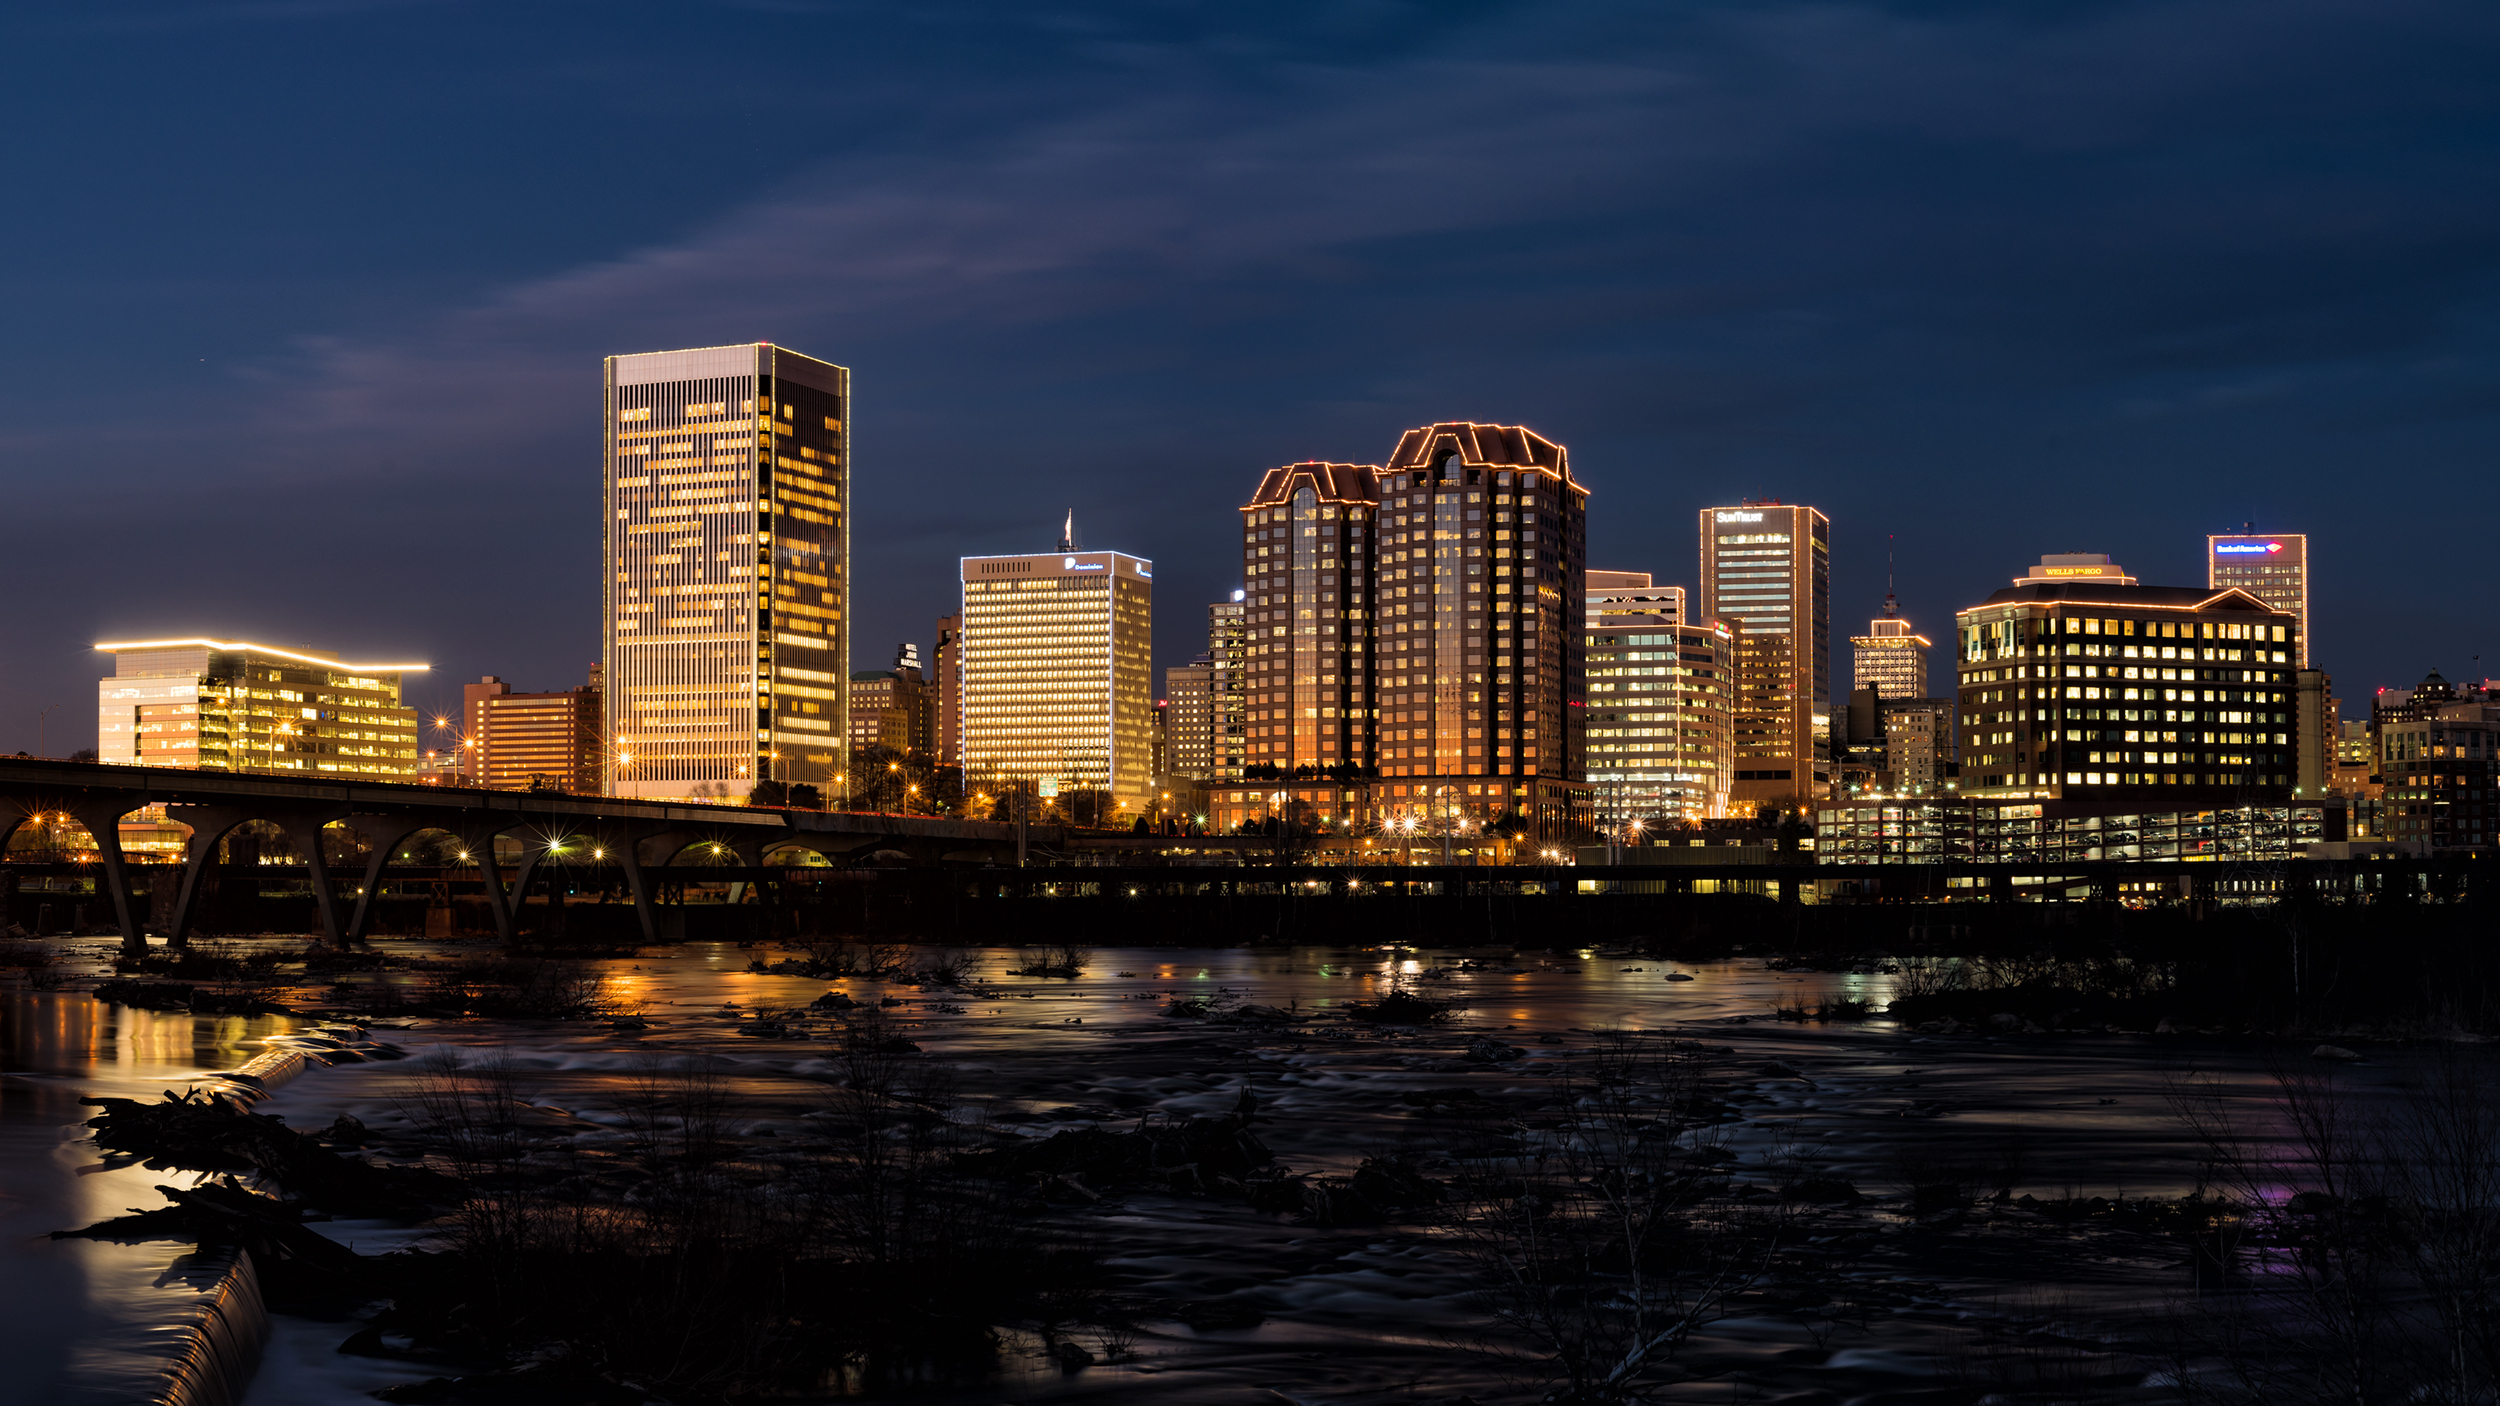 RVA Skyline all lit up for the holidays!